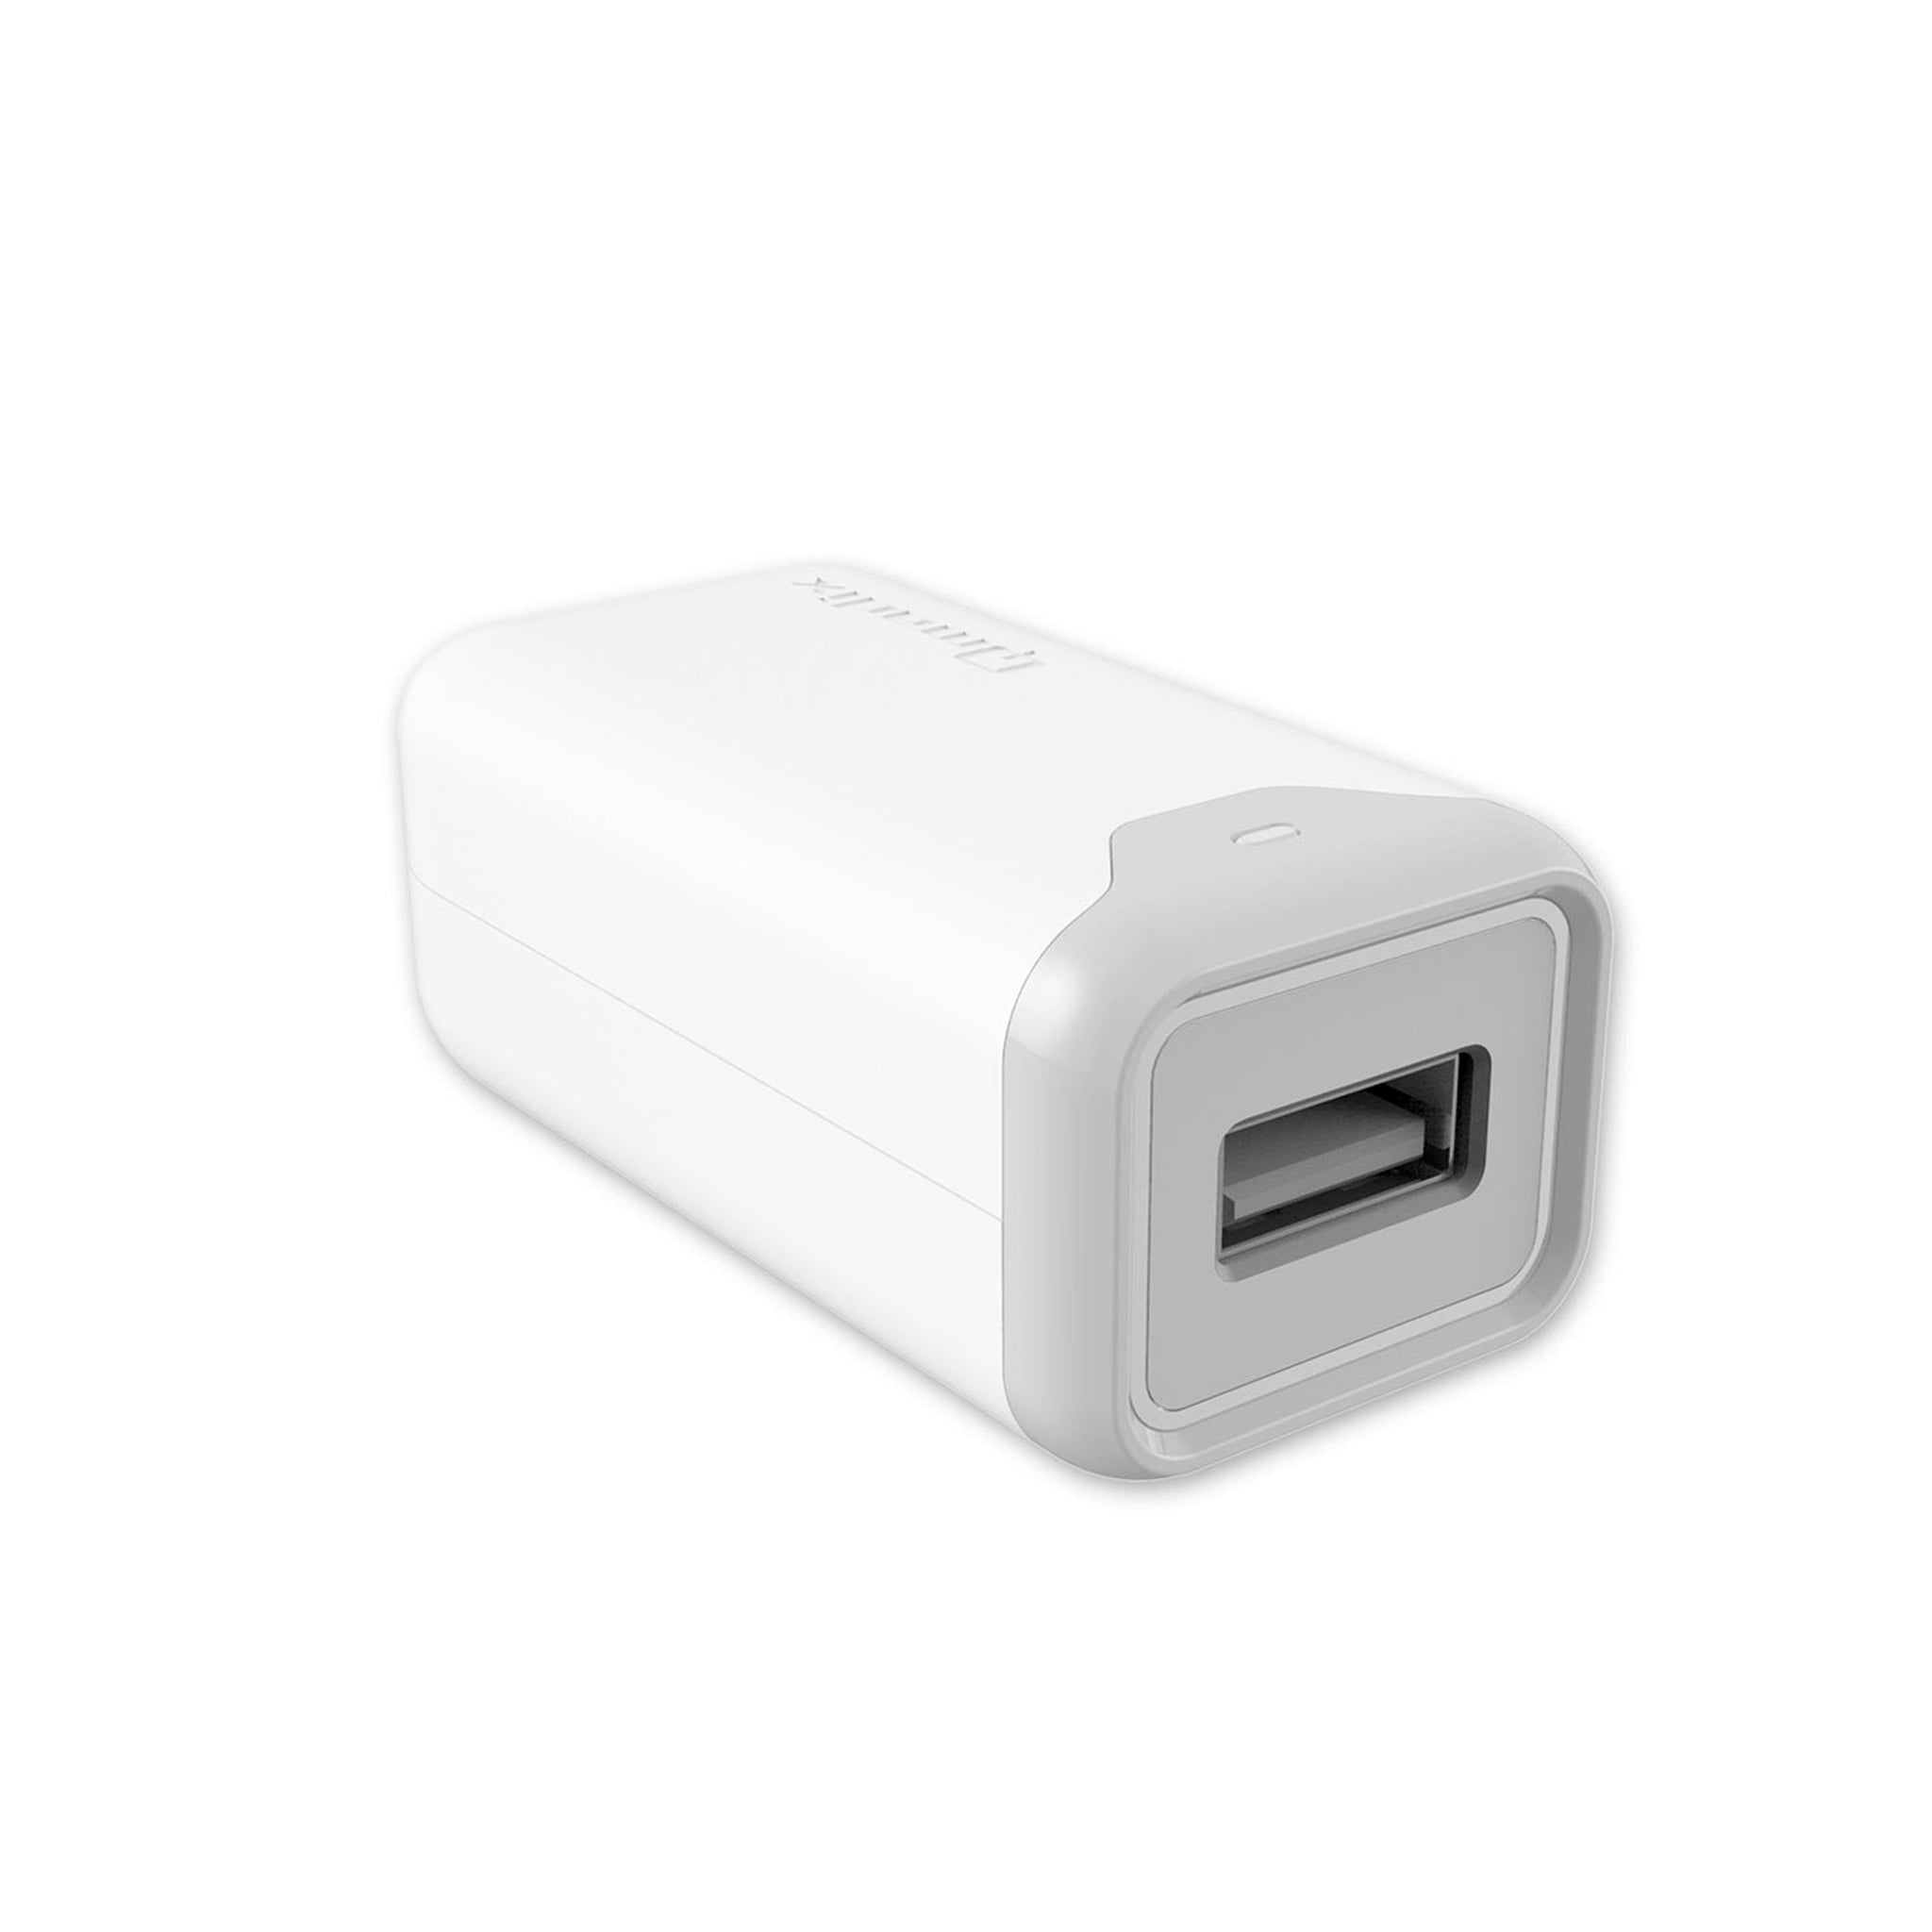 Qmadix - Wall Charger 2.4a For Apple Lightning Devices - White